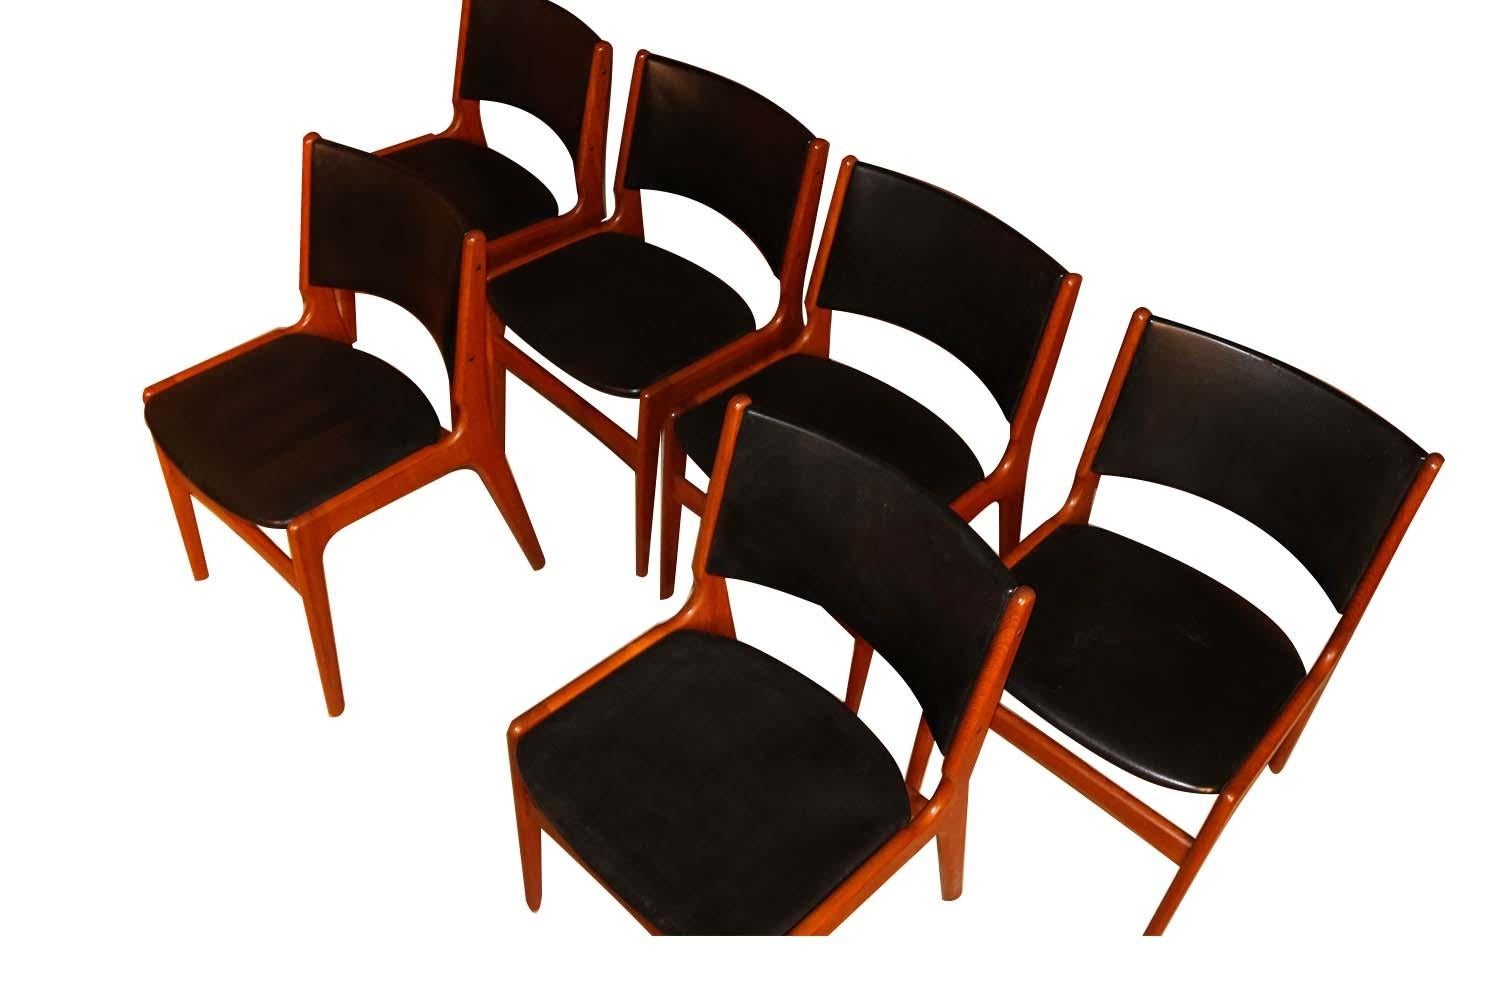 Six beautiful midcentury model #89 teak dining chairs by Scandinavian designer Erik Buch for Povl Dinesen, circa 1960s. Buch’s organic and functional aesthetic are showcased in these beautifully crafted modern teak dining chairs. This rare set of